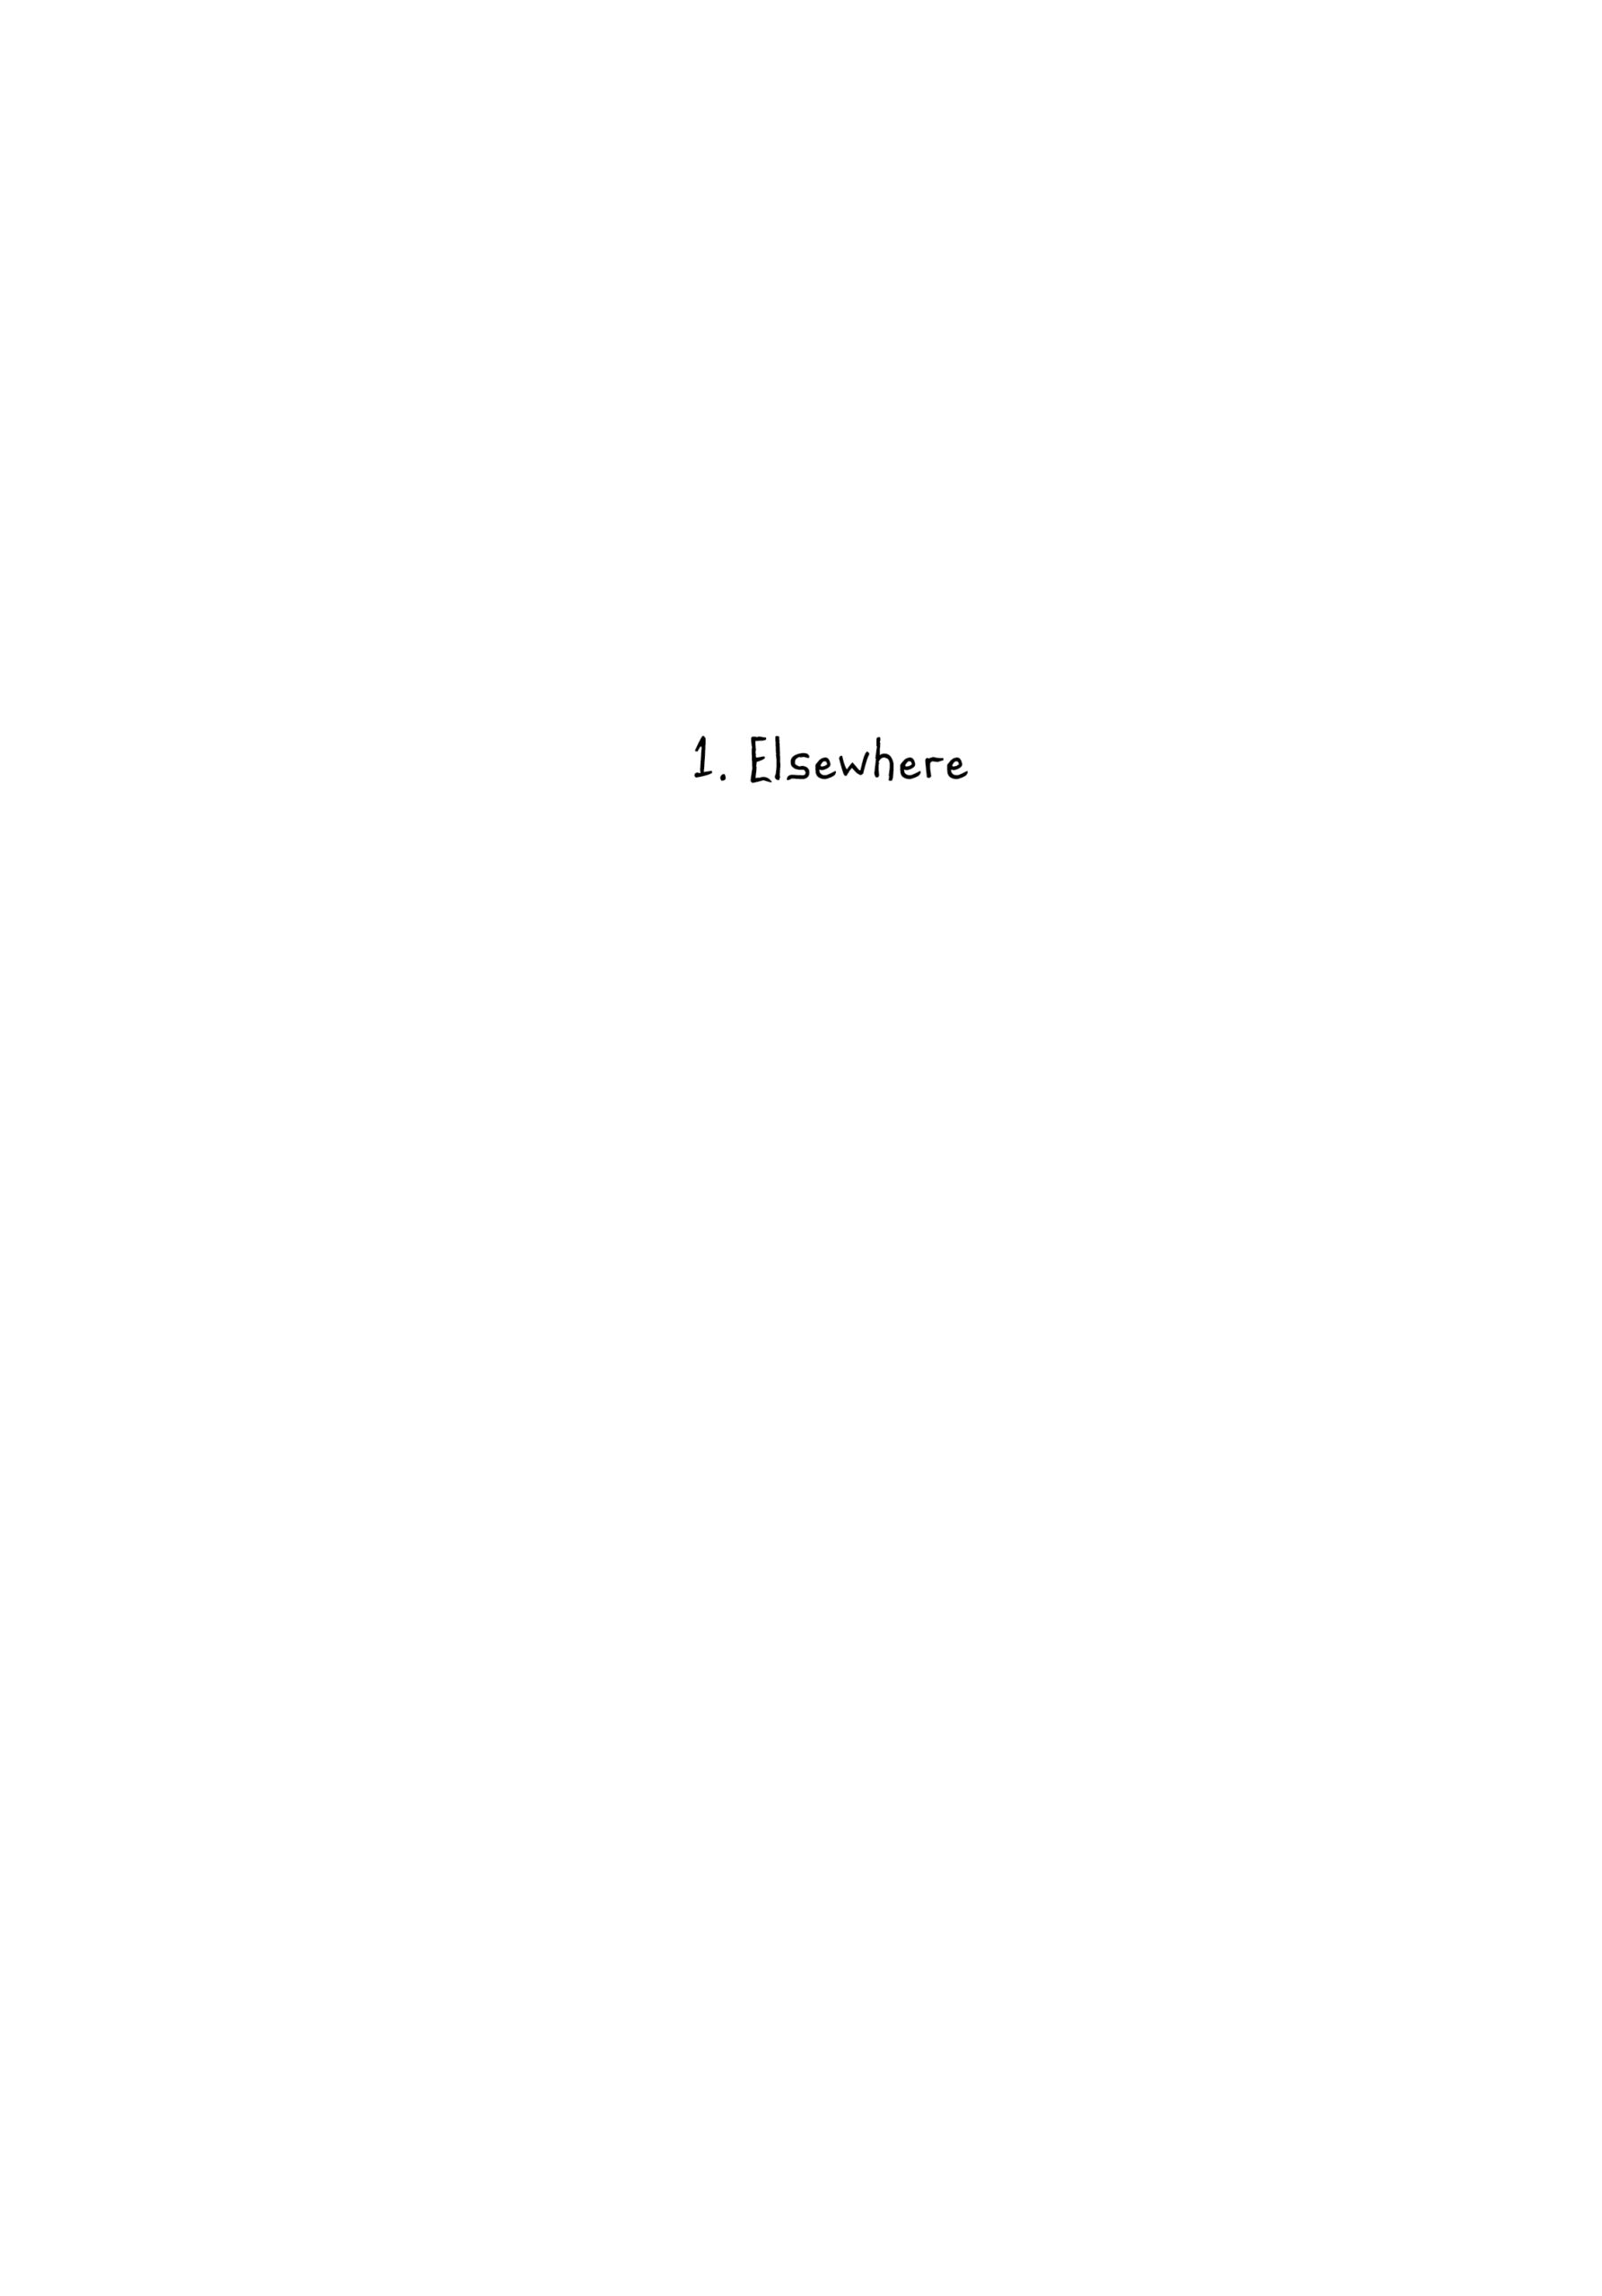 Title page: "1. Elsewhere"